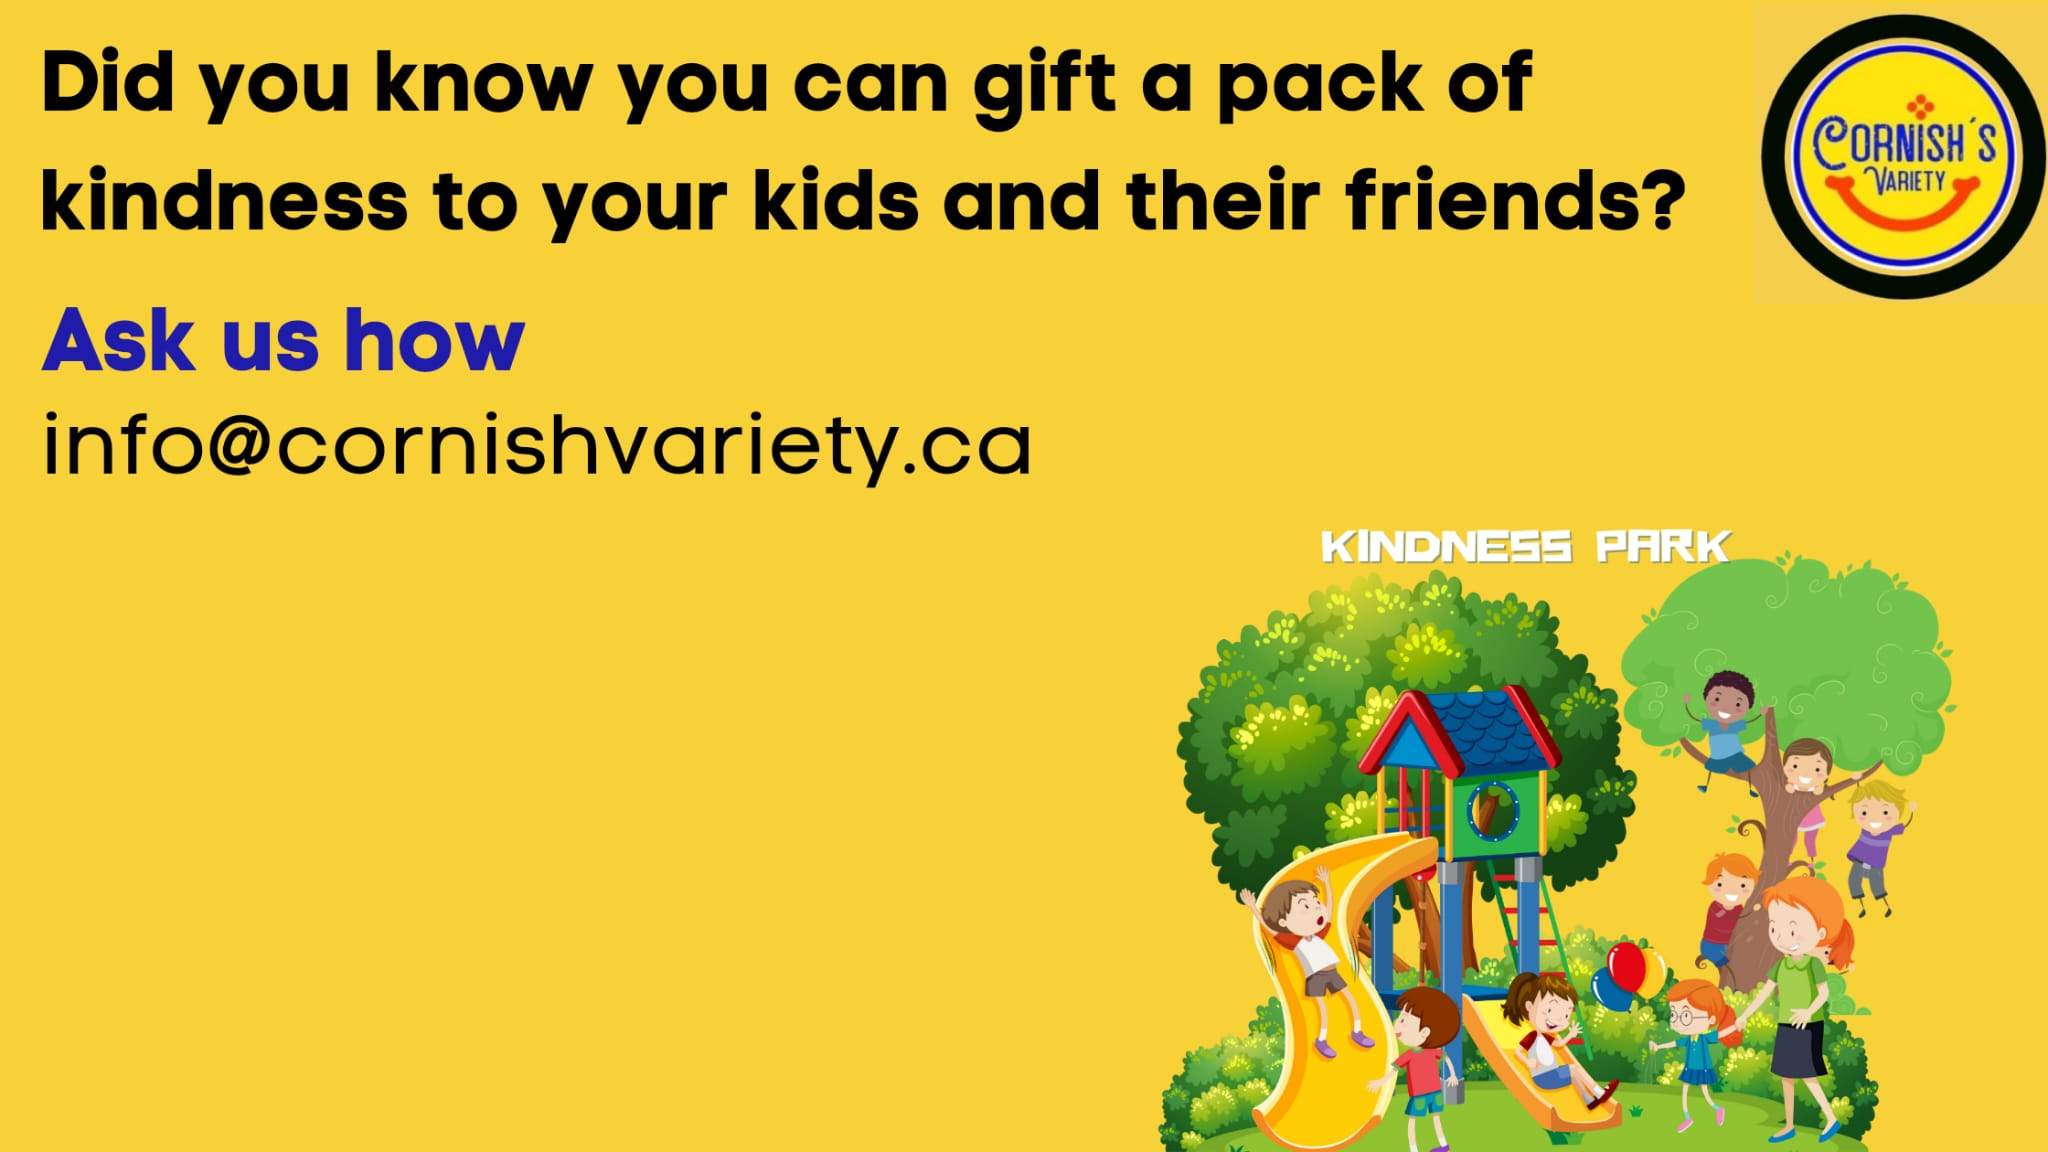 Great for your little ones party souvenirs! Encourage kids to practice kindness.